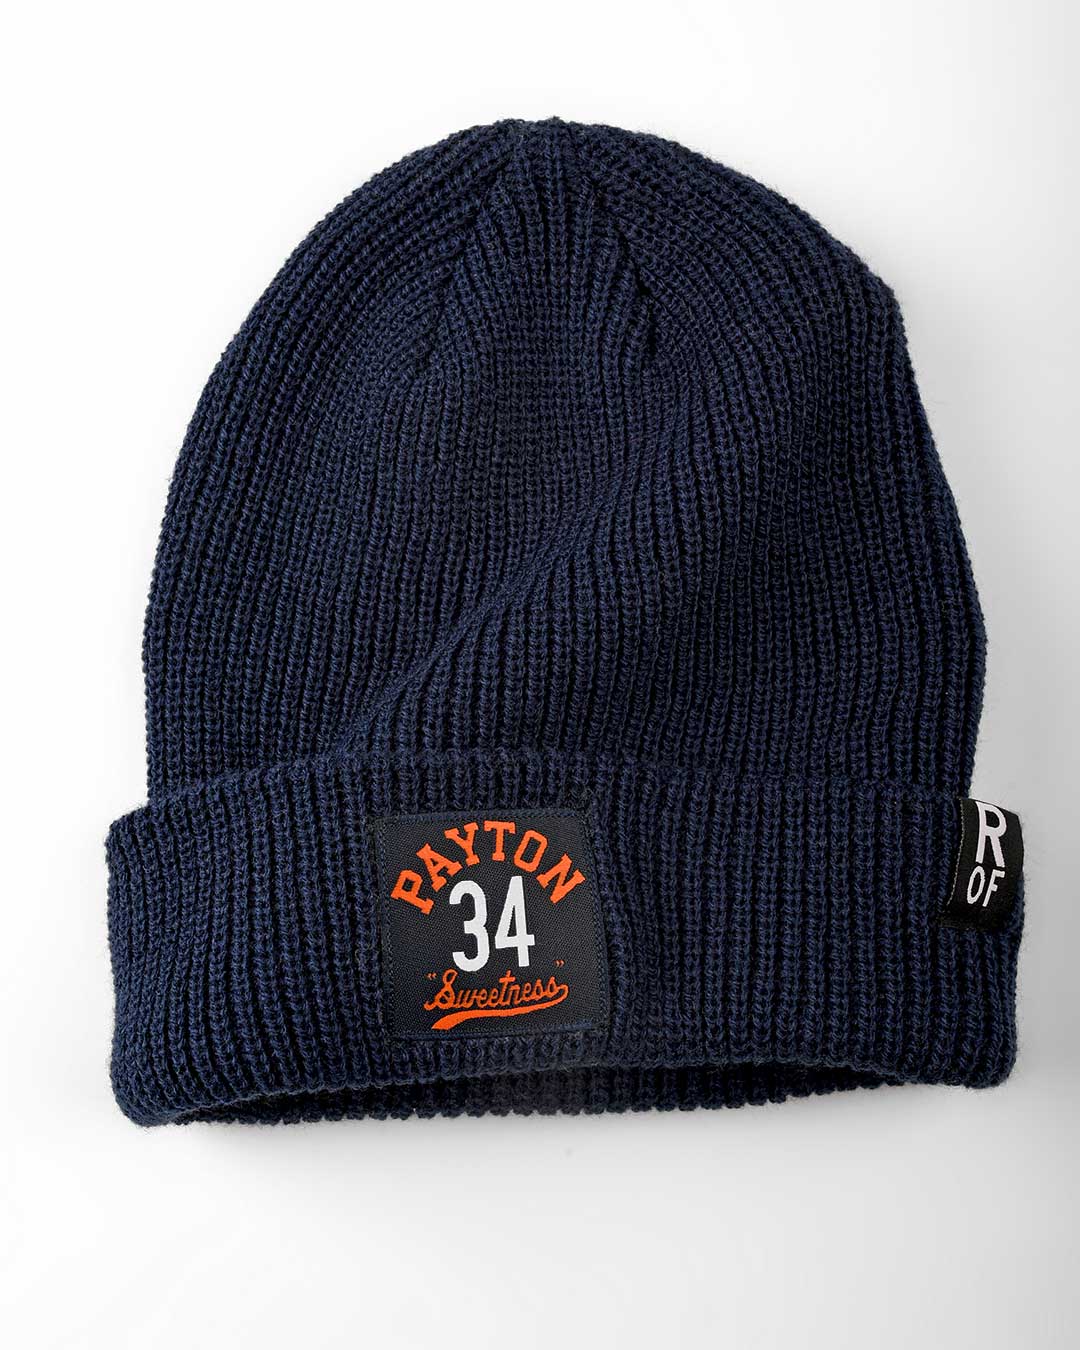 Walter Payton Sweetness Navy Beanie - Roots of Fight